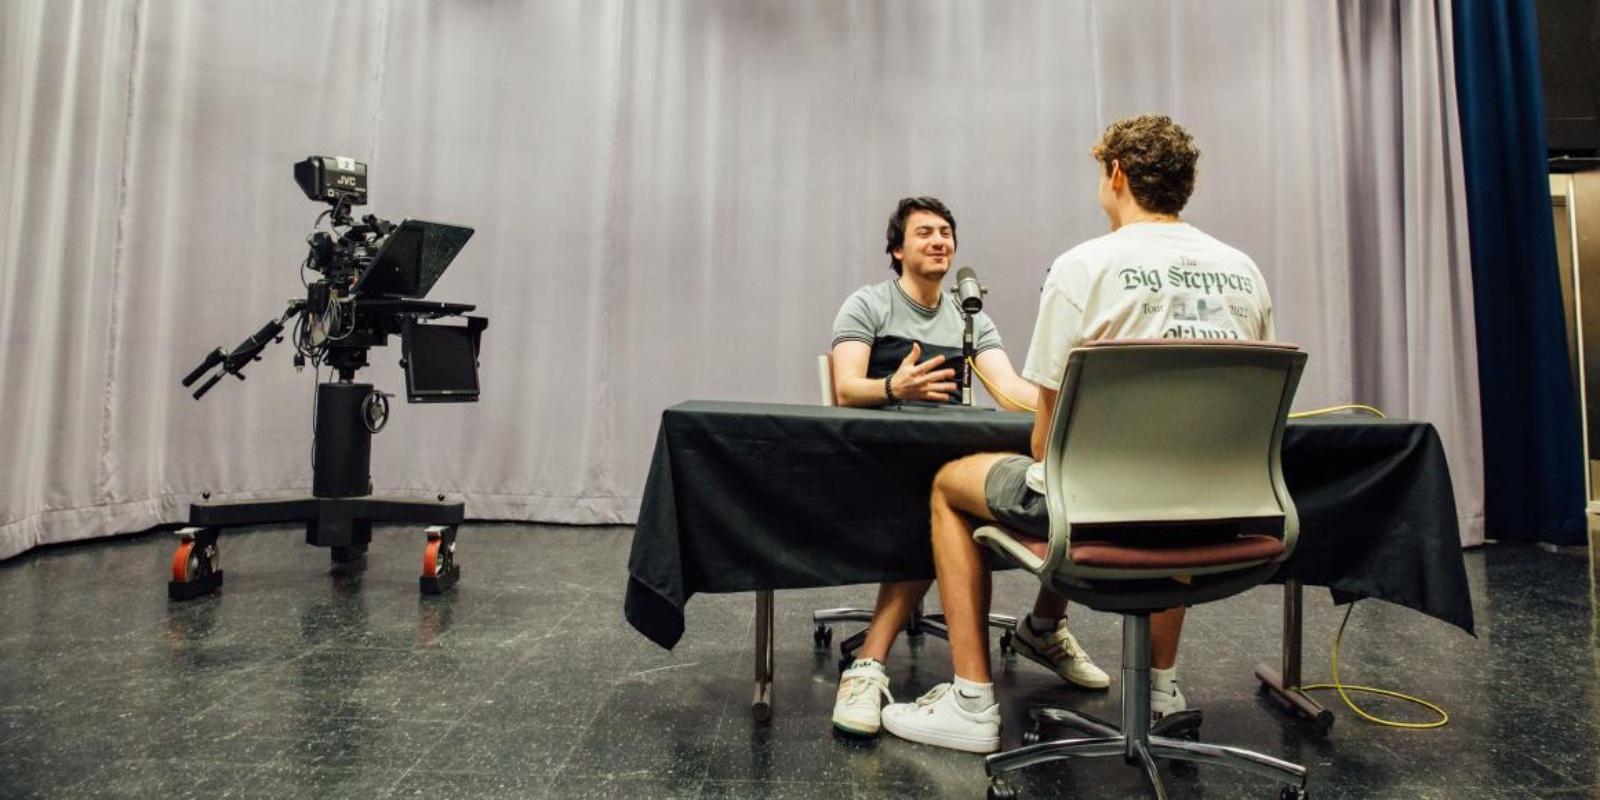 Two students record an interview inside a spacious recording studio with long gray drapes and a professional TV camera sitting in the background